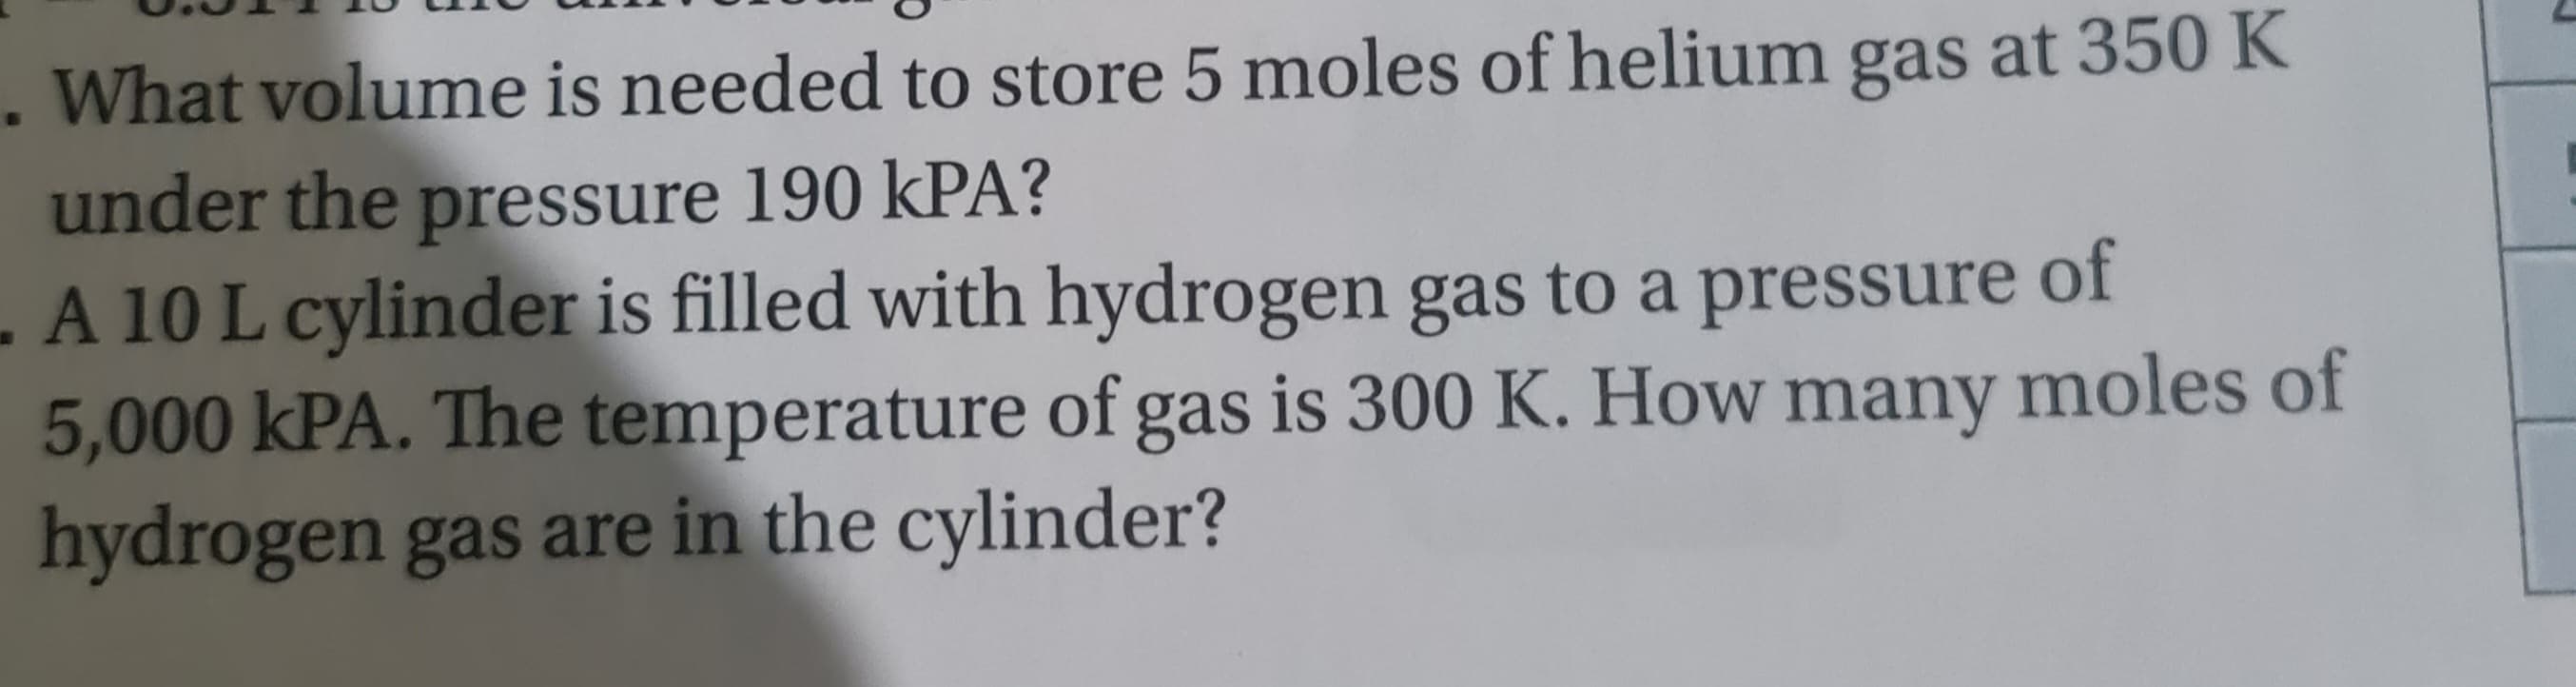 . What volume is needed to store 5 moles of helium gas at 350 K
under the pressure 190 KPA?
of
- A 10 L cylinder is filled with hydrogen gas to a pressure
5,000 kPA. The temperature of gas is 300 K. How many moles of
hydrogen gas are in the cylinder?